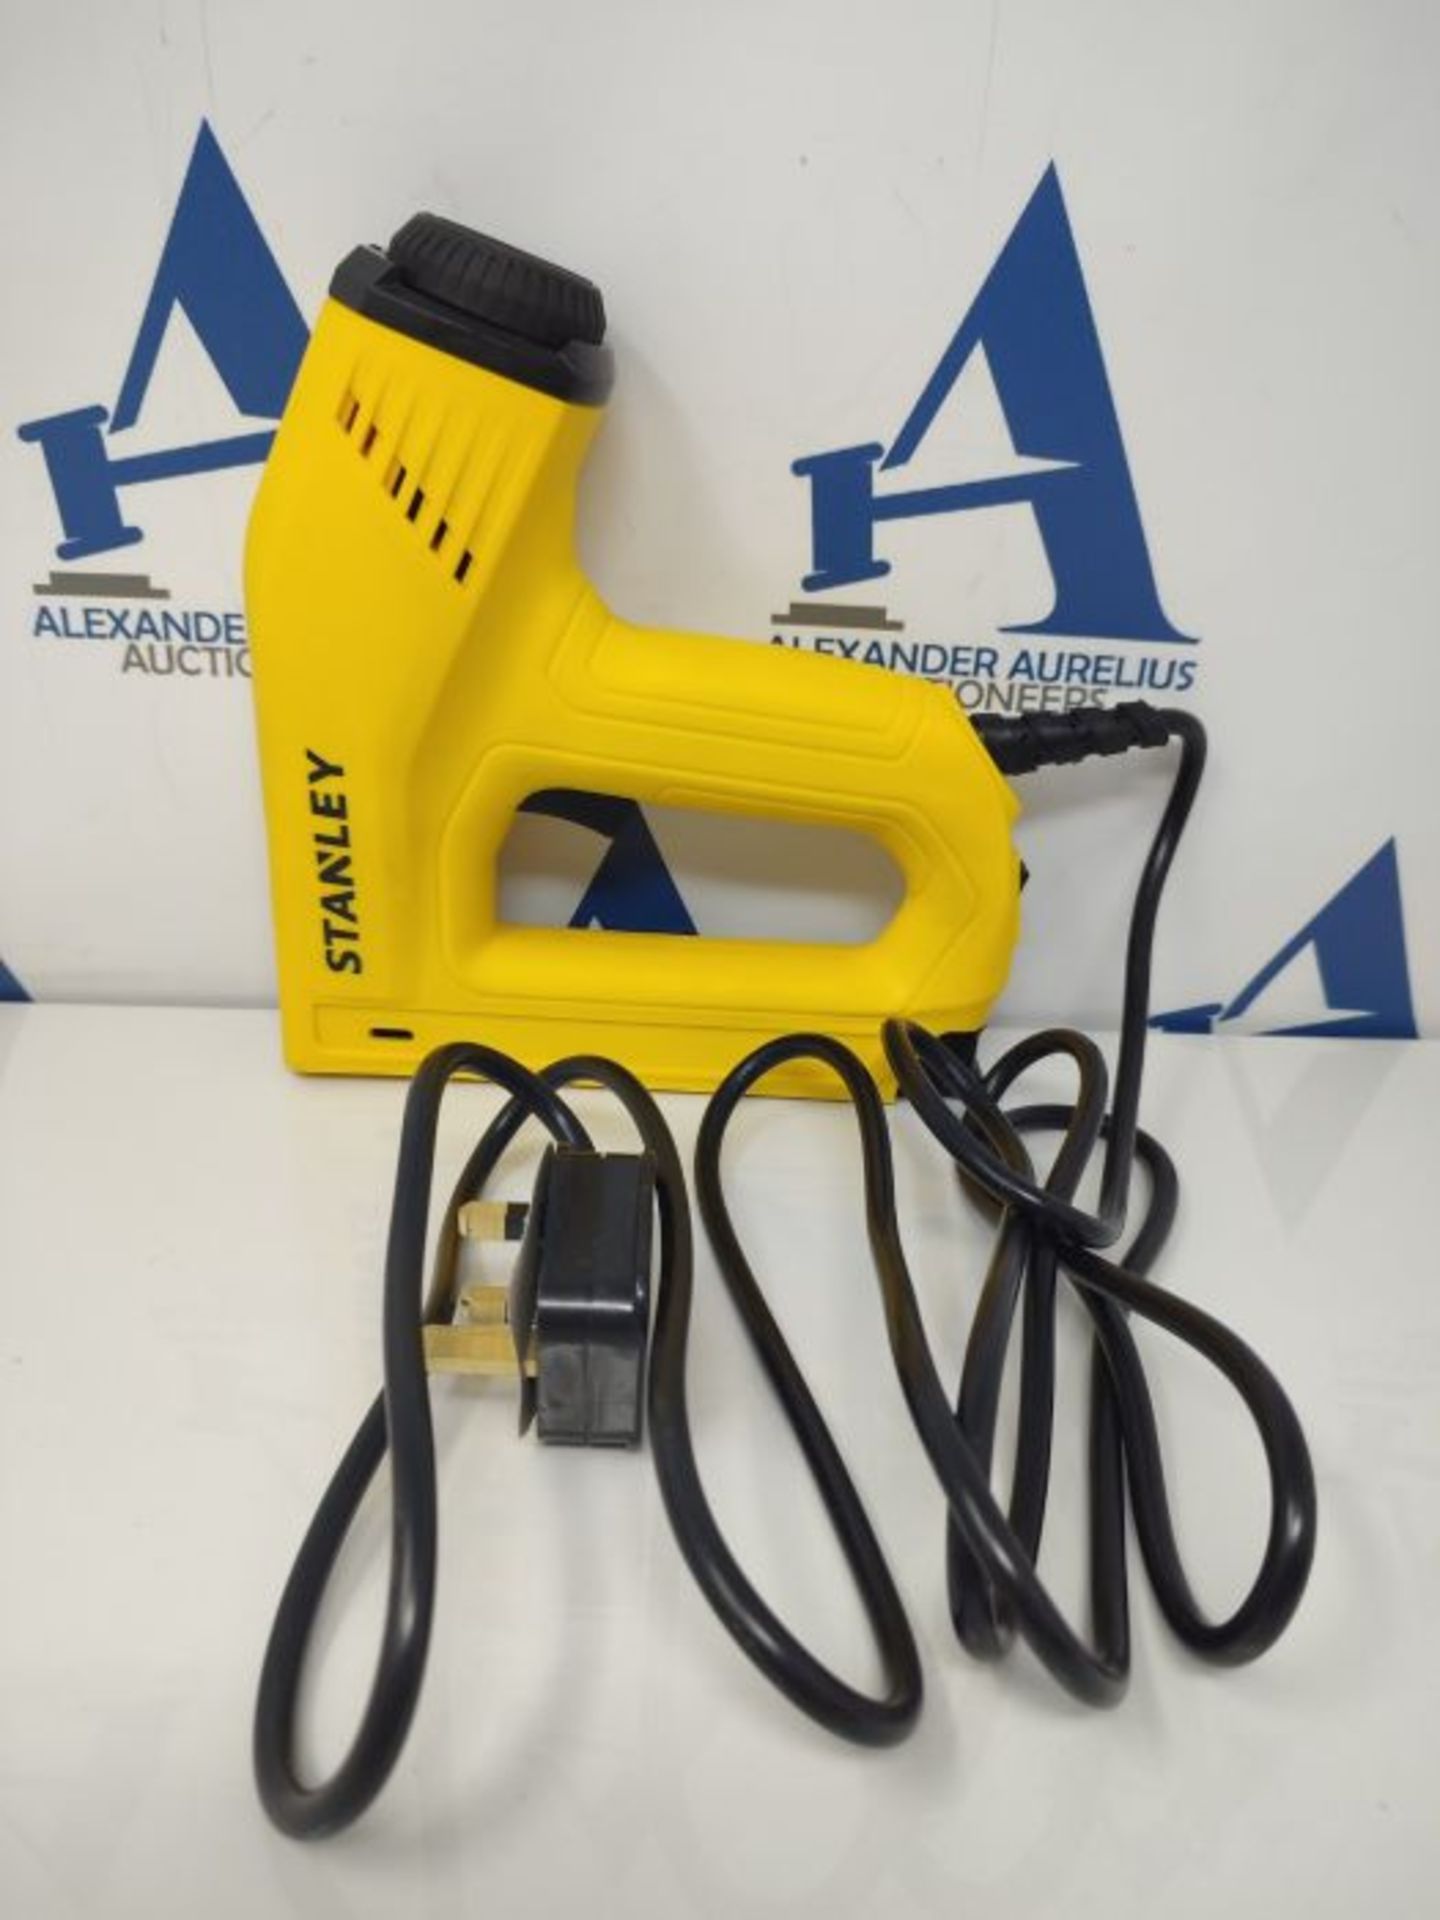 Stanley 0-TRE550 Heavy Duty Electric Staple/Nail Gun, YELLOW - Image 3 of 3